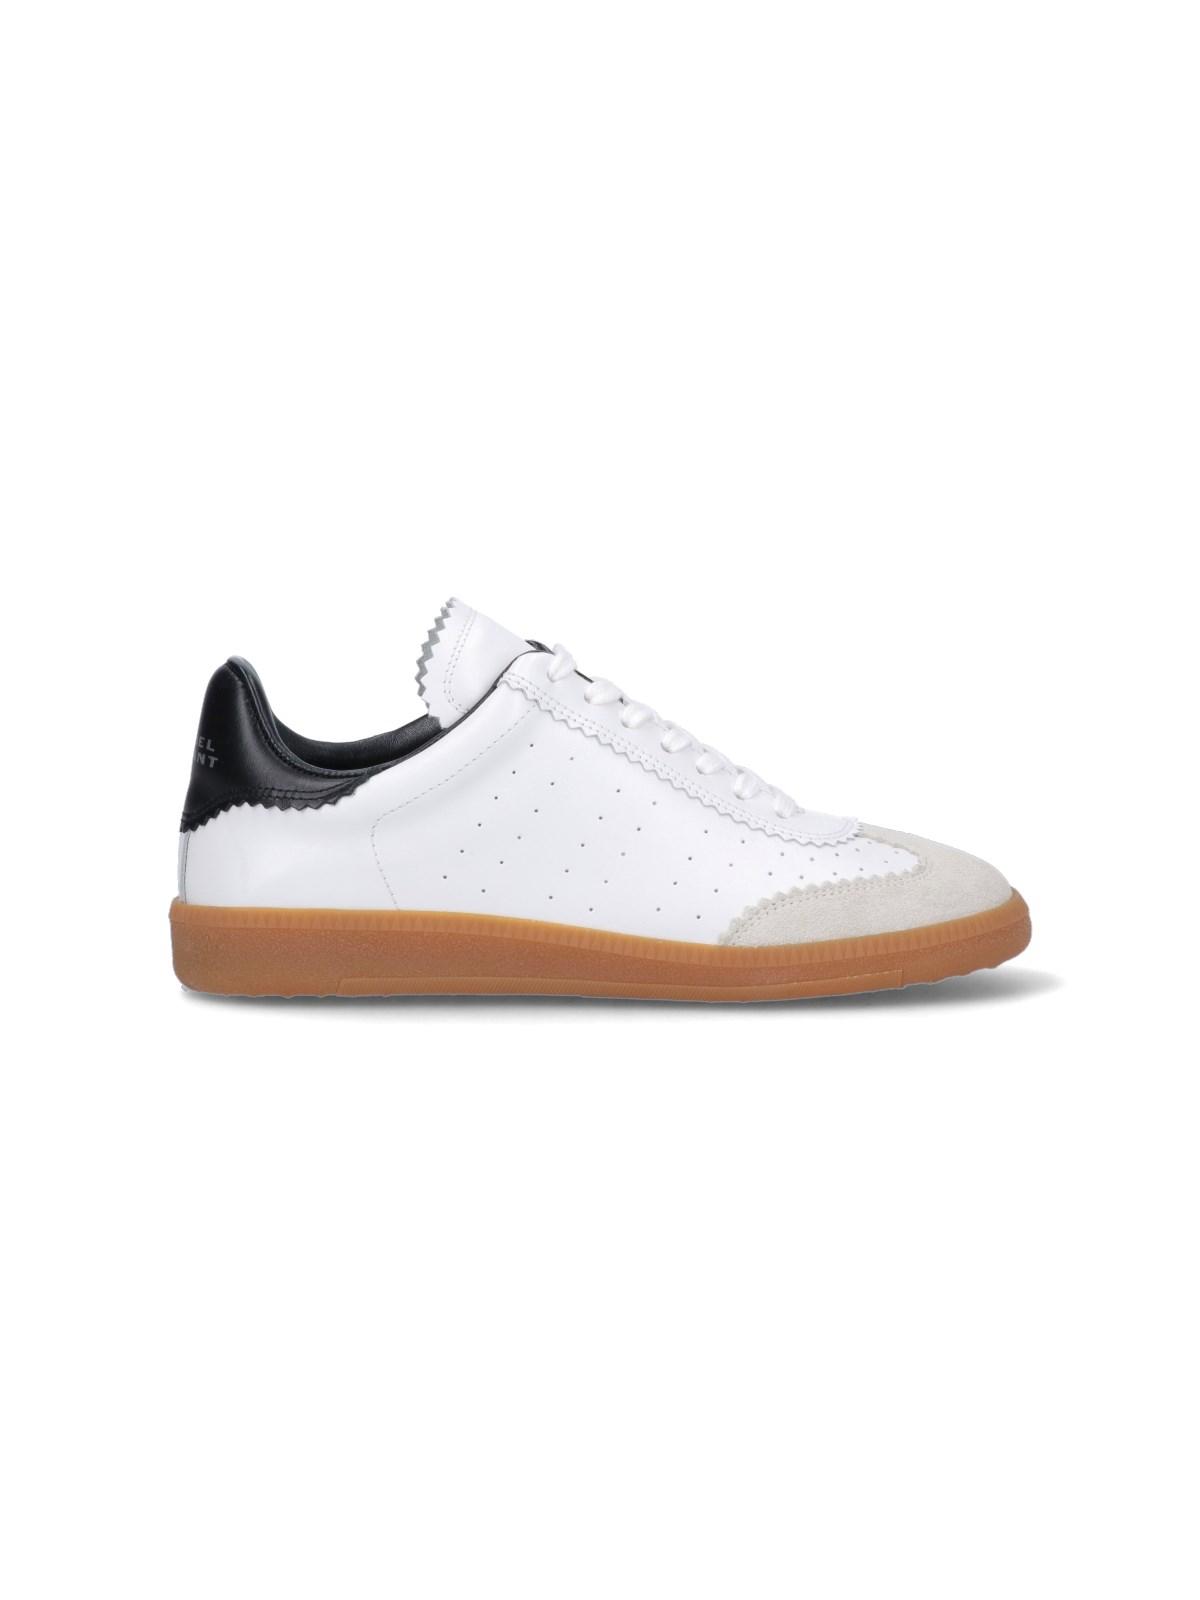 Isabel Marant 'bryce' Sneakers in White | Lyst